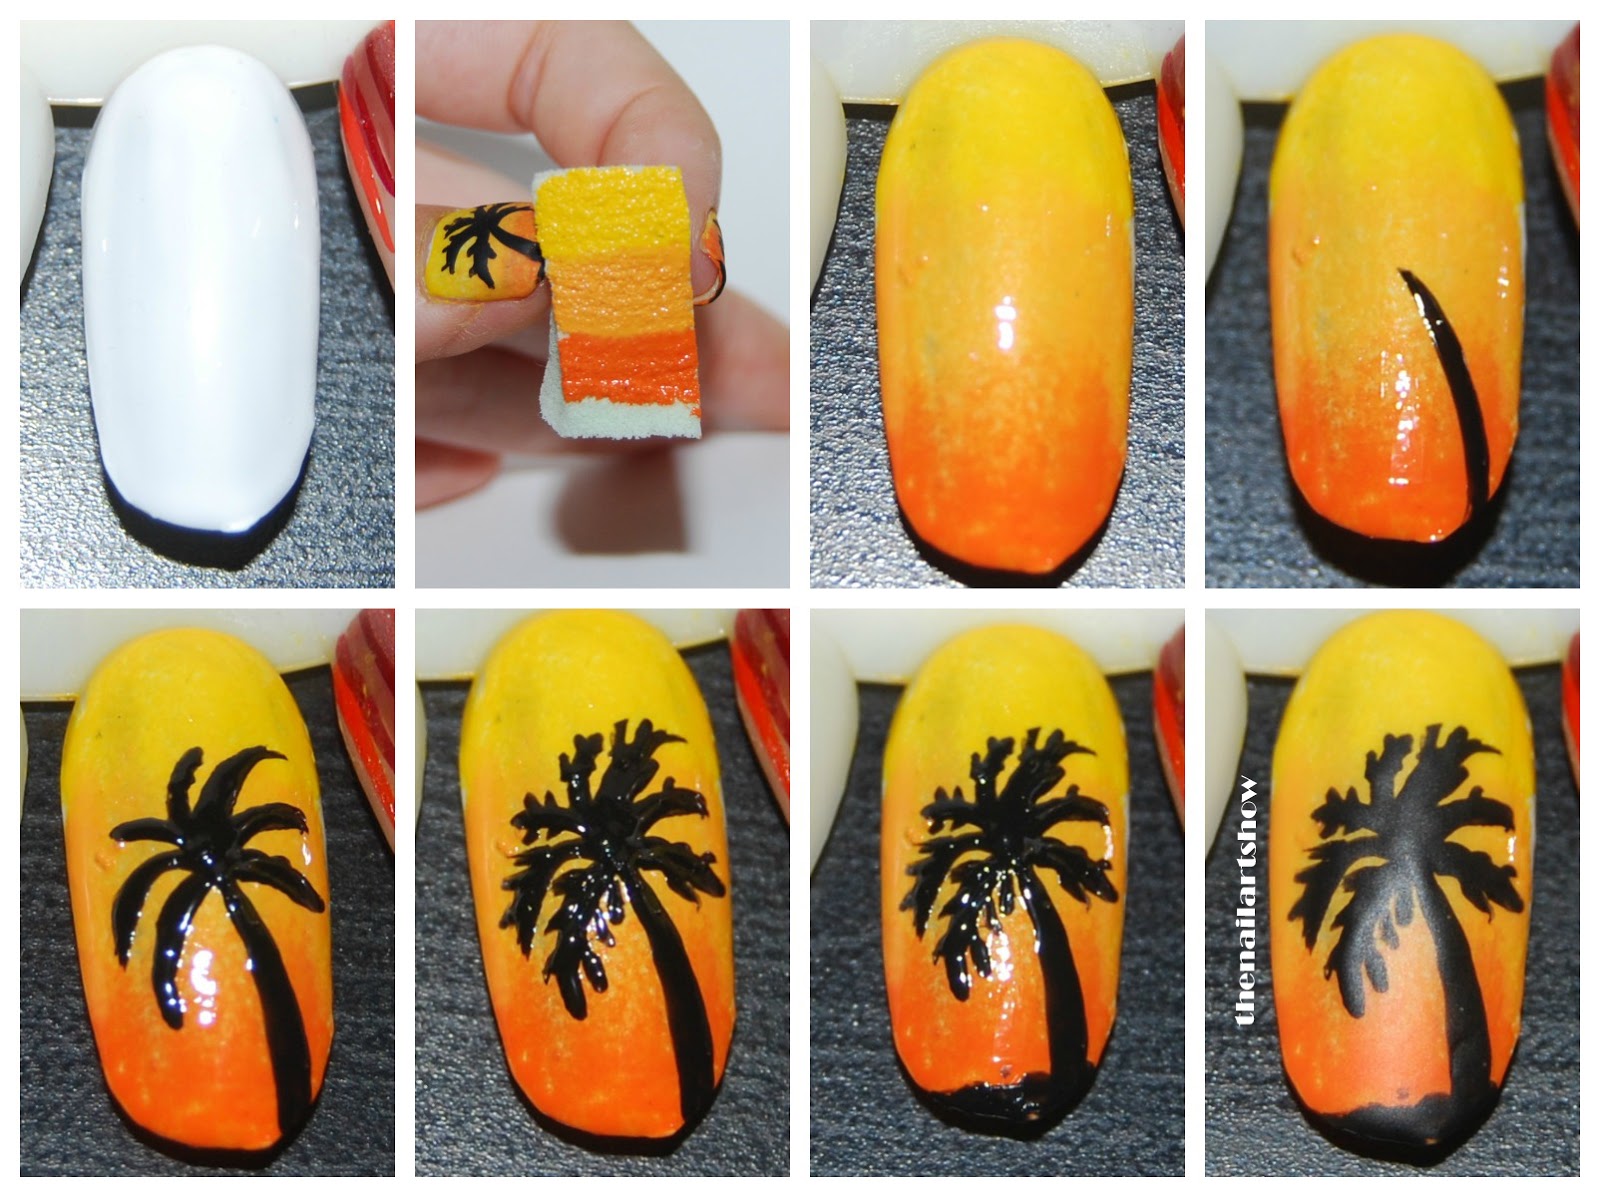 1. "Palm Tree Nail Art Tutorial with Christmas Decorations" - wide 9